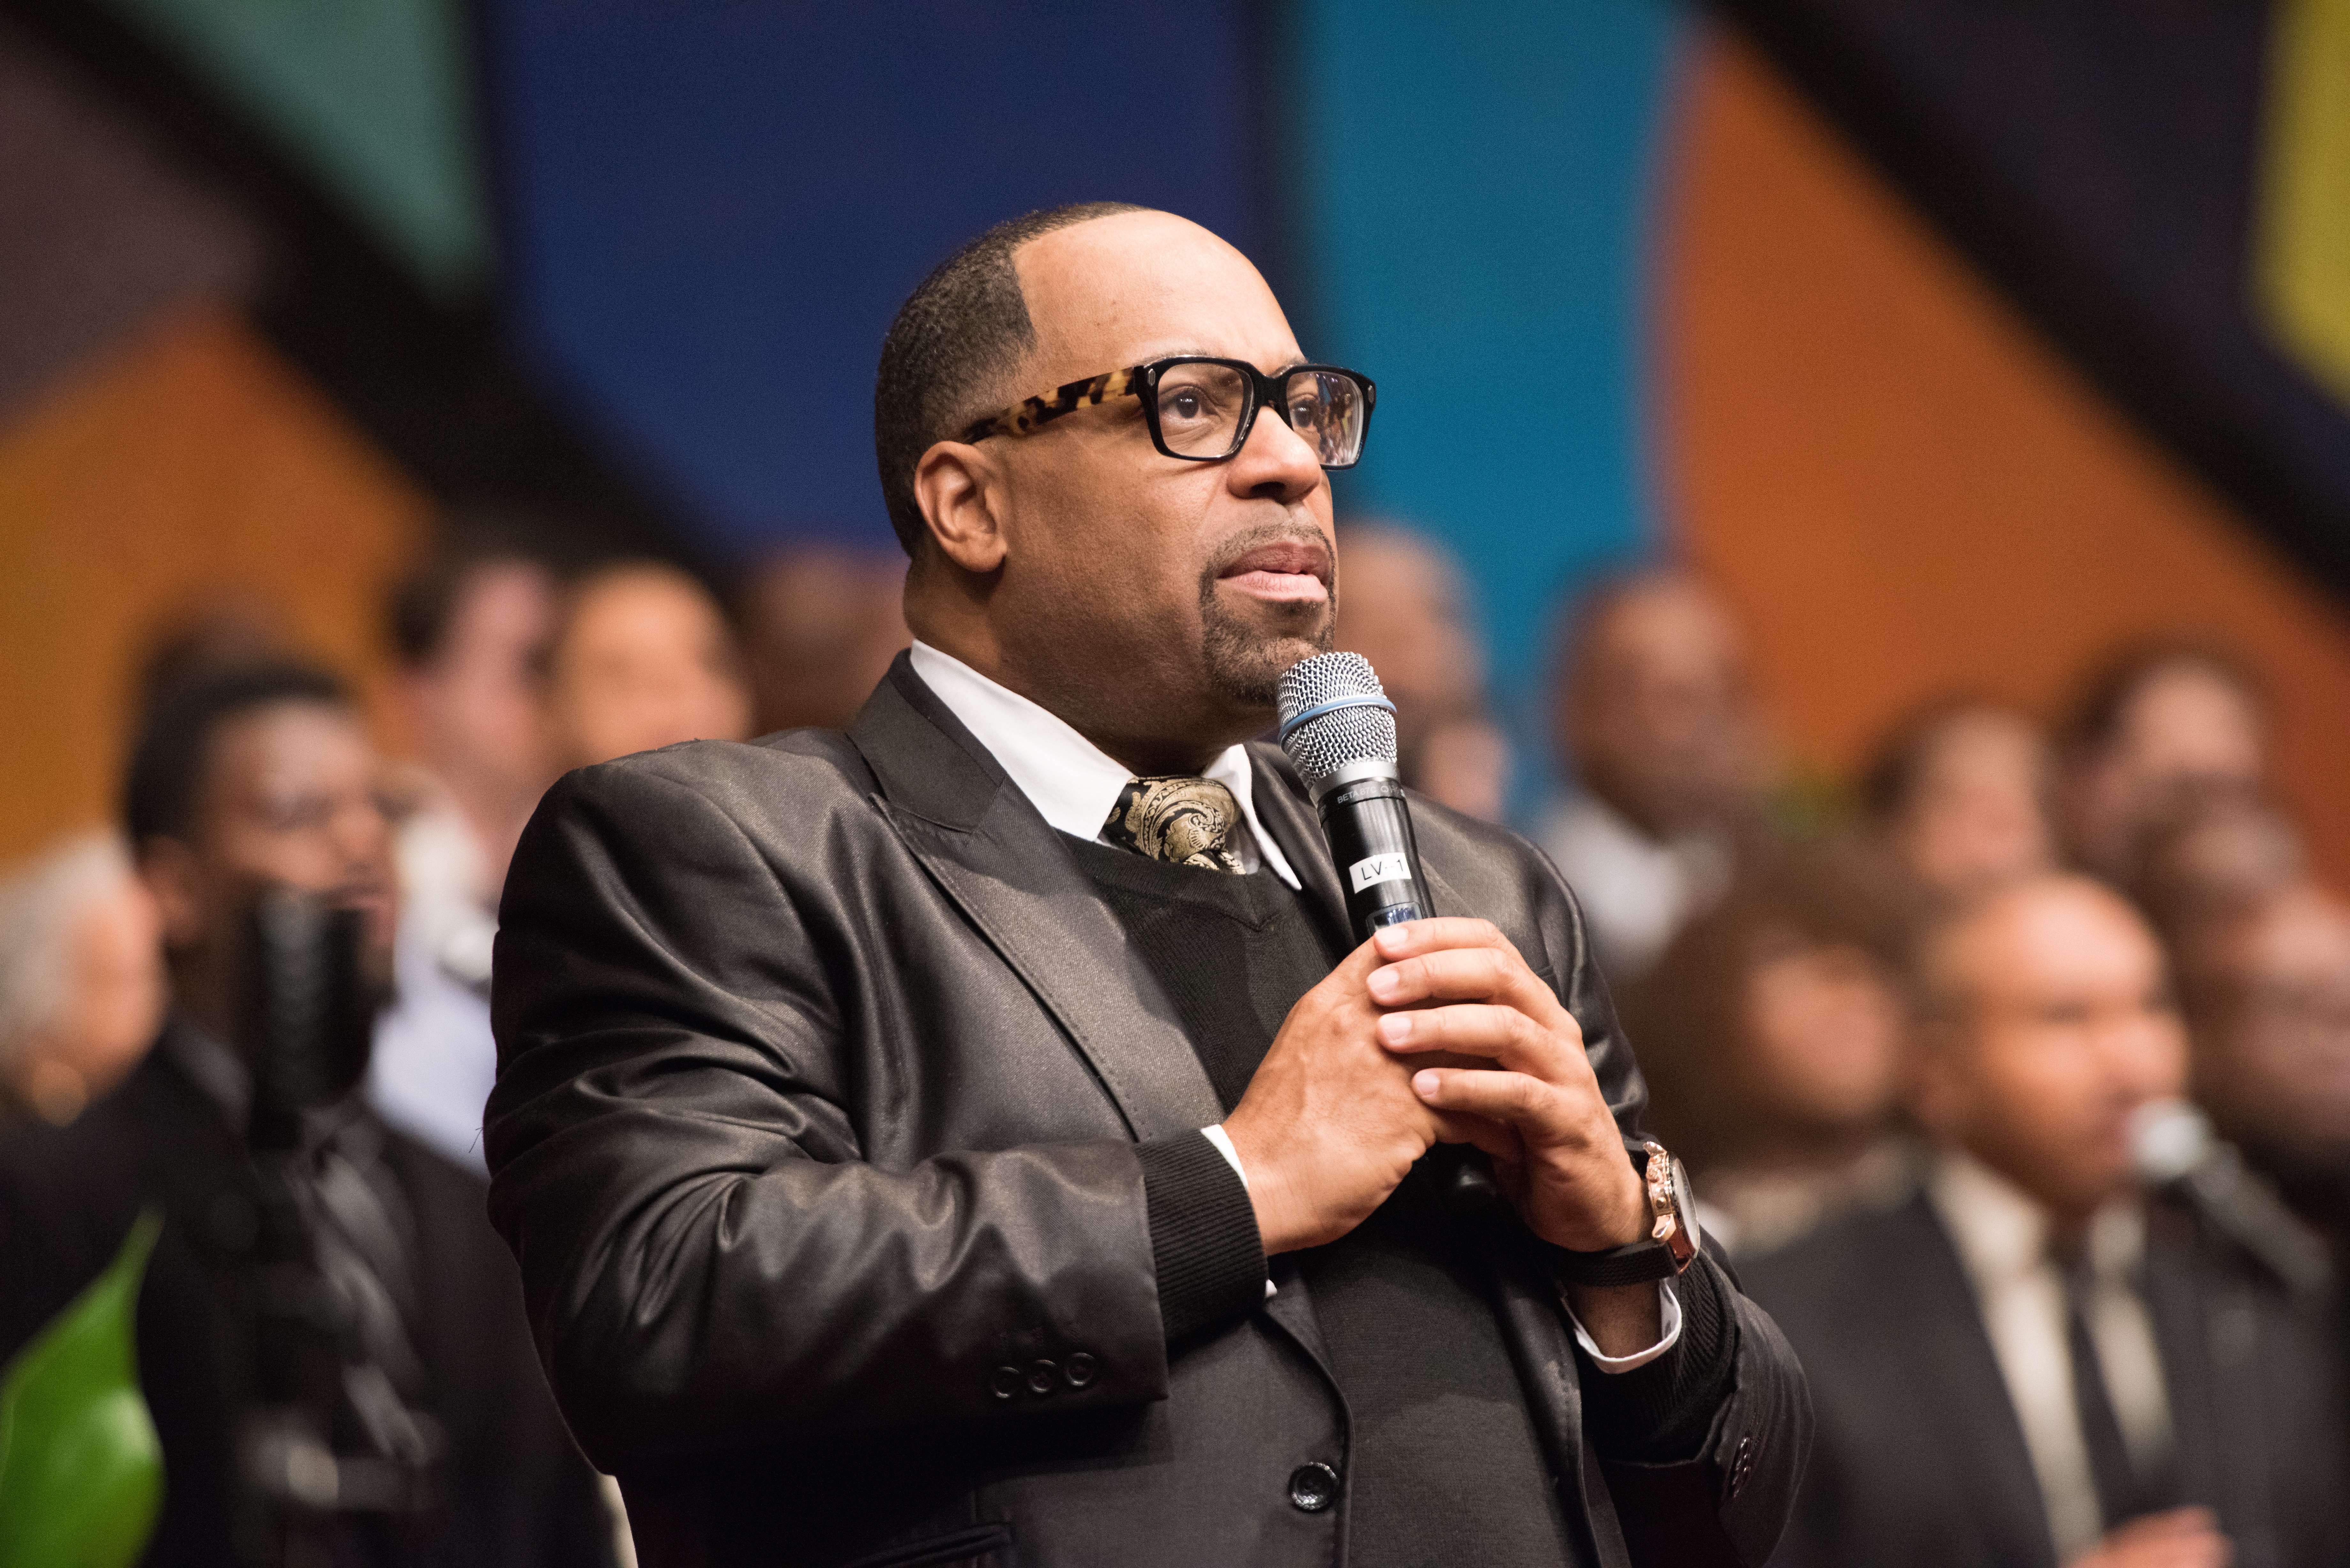 Andrae Crouch Memorial Celebration Life Of Events